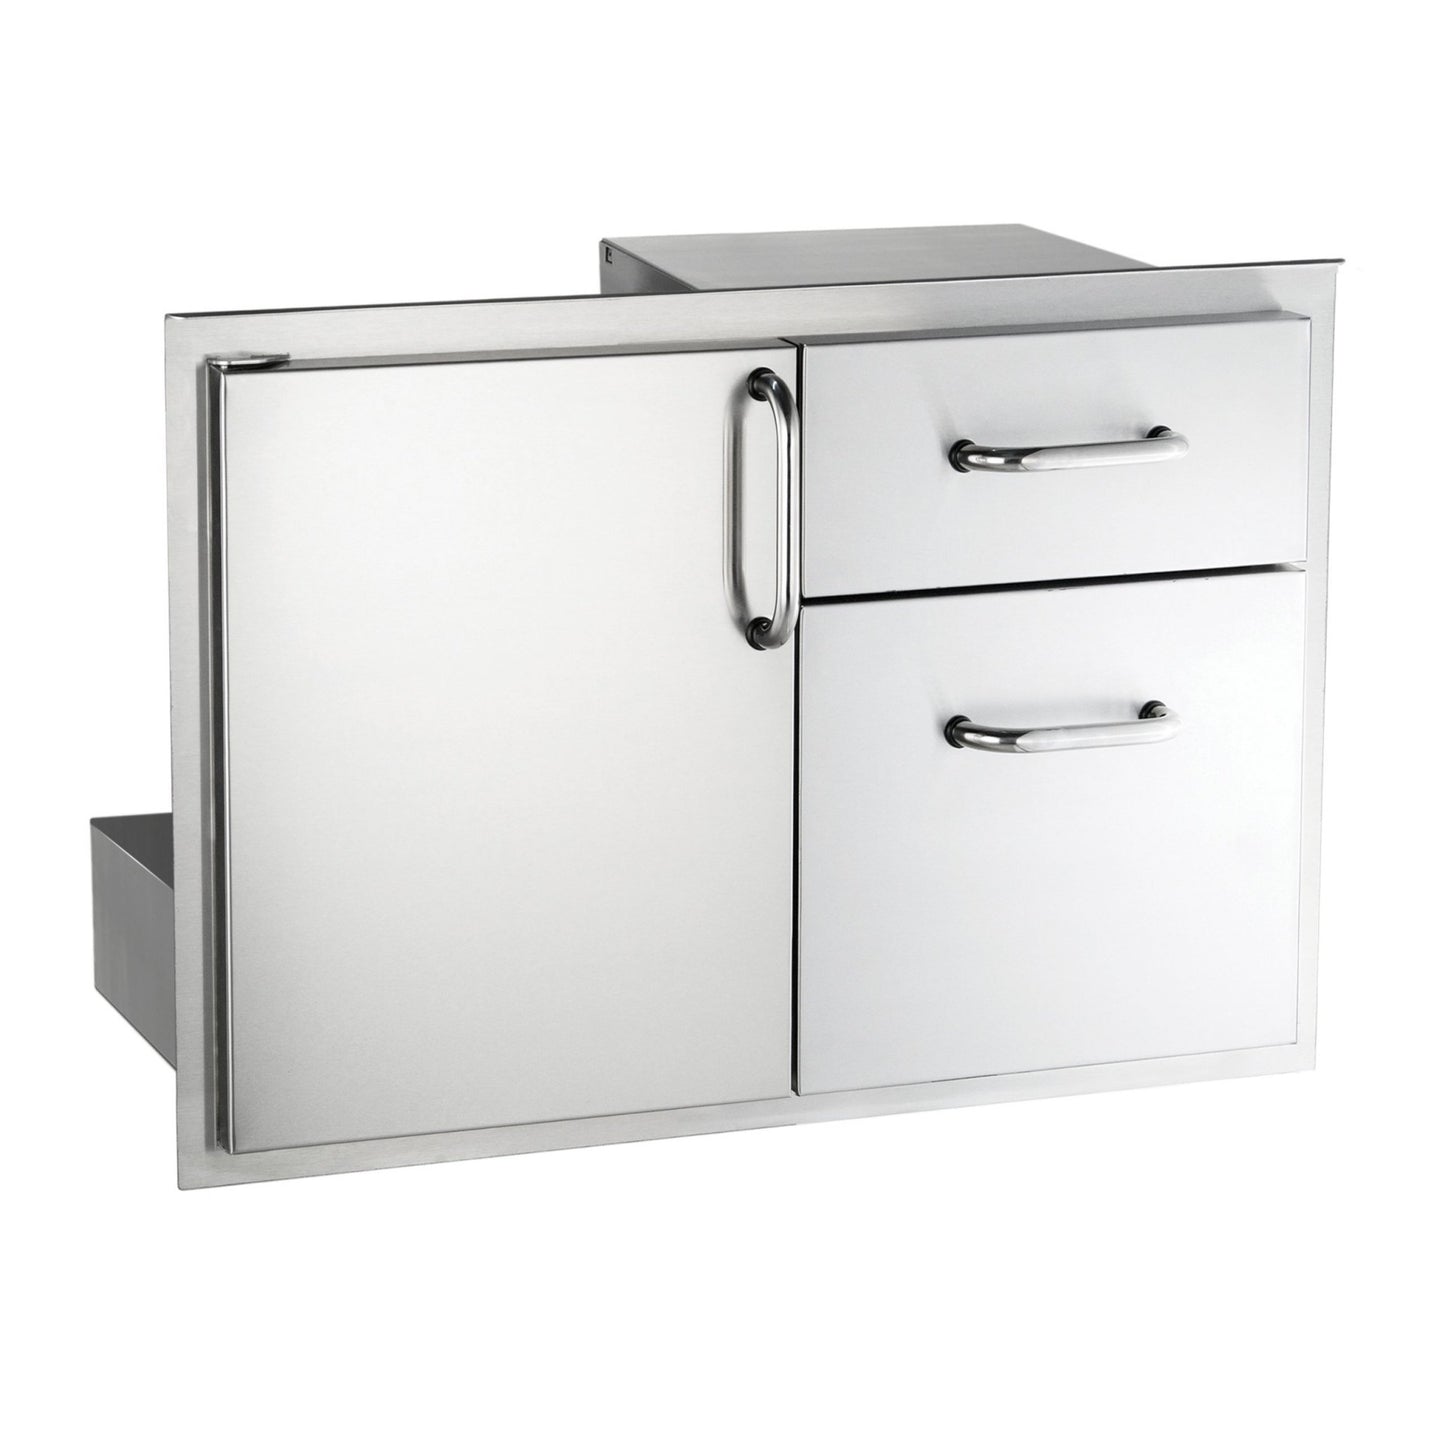 Fire Magic 33810S 30-Inch Select Access Door/Drawer Combo - grillsNmore.com